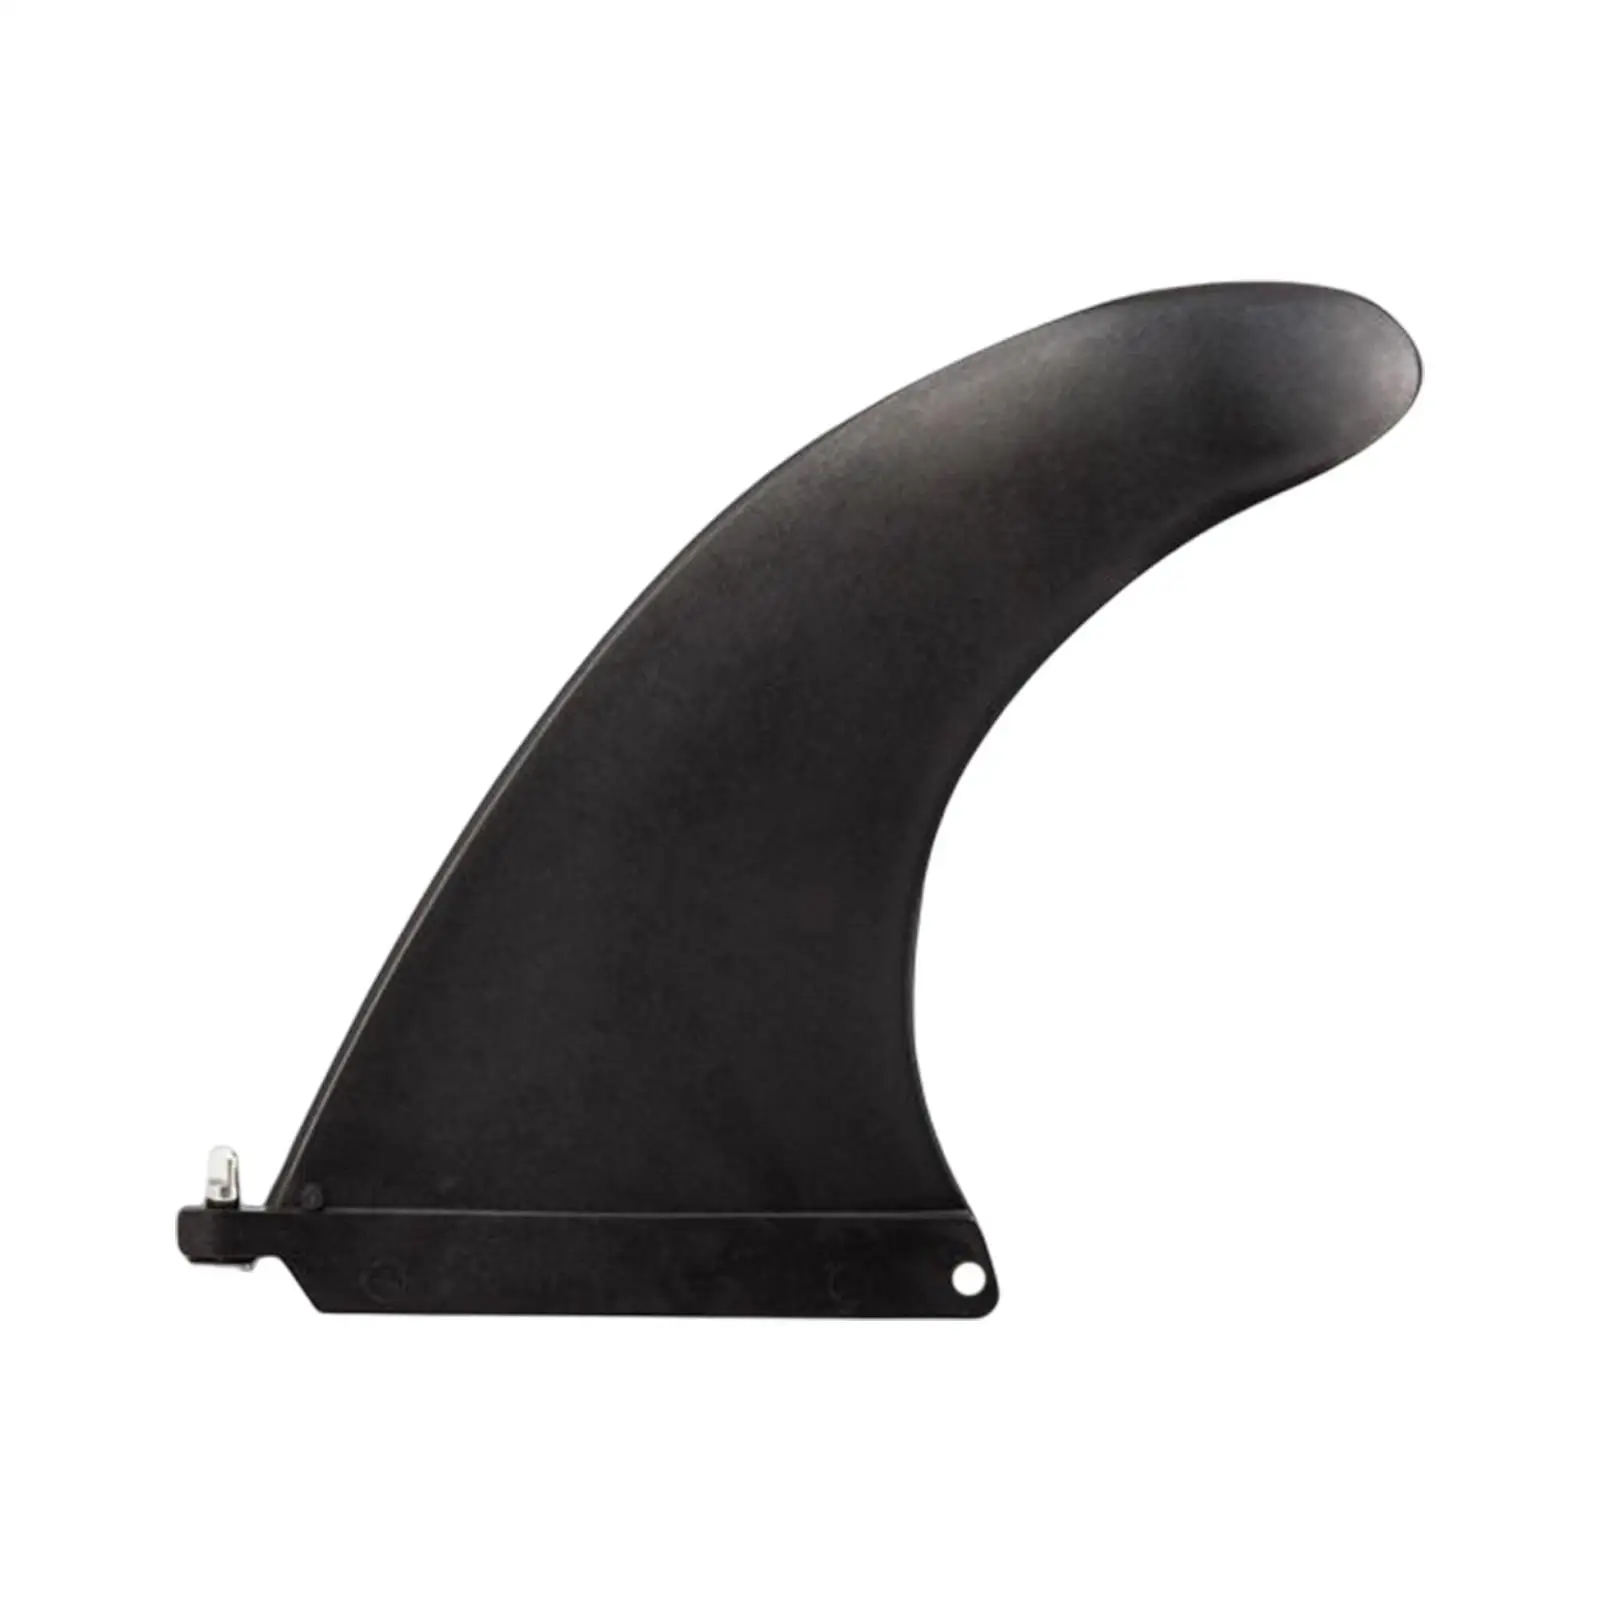 8inch Surfing Center Fin Replacement Detachable Large Thruster Tracking Tail